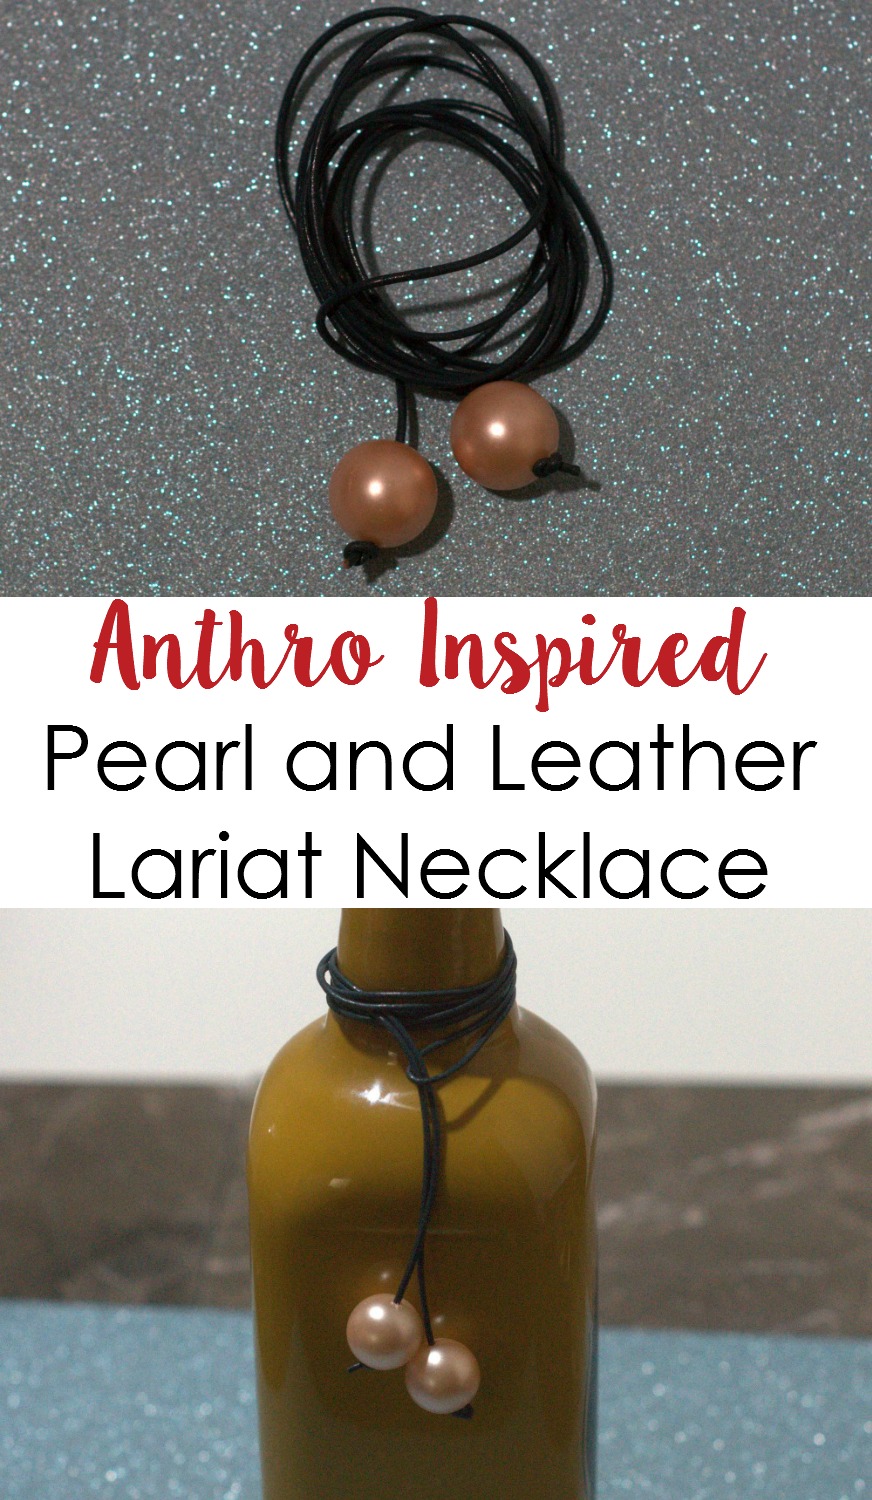 Anthropologie inspired pearl and leather lariat necklace tutorial